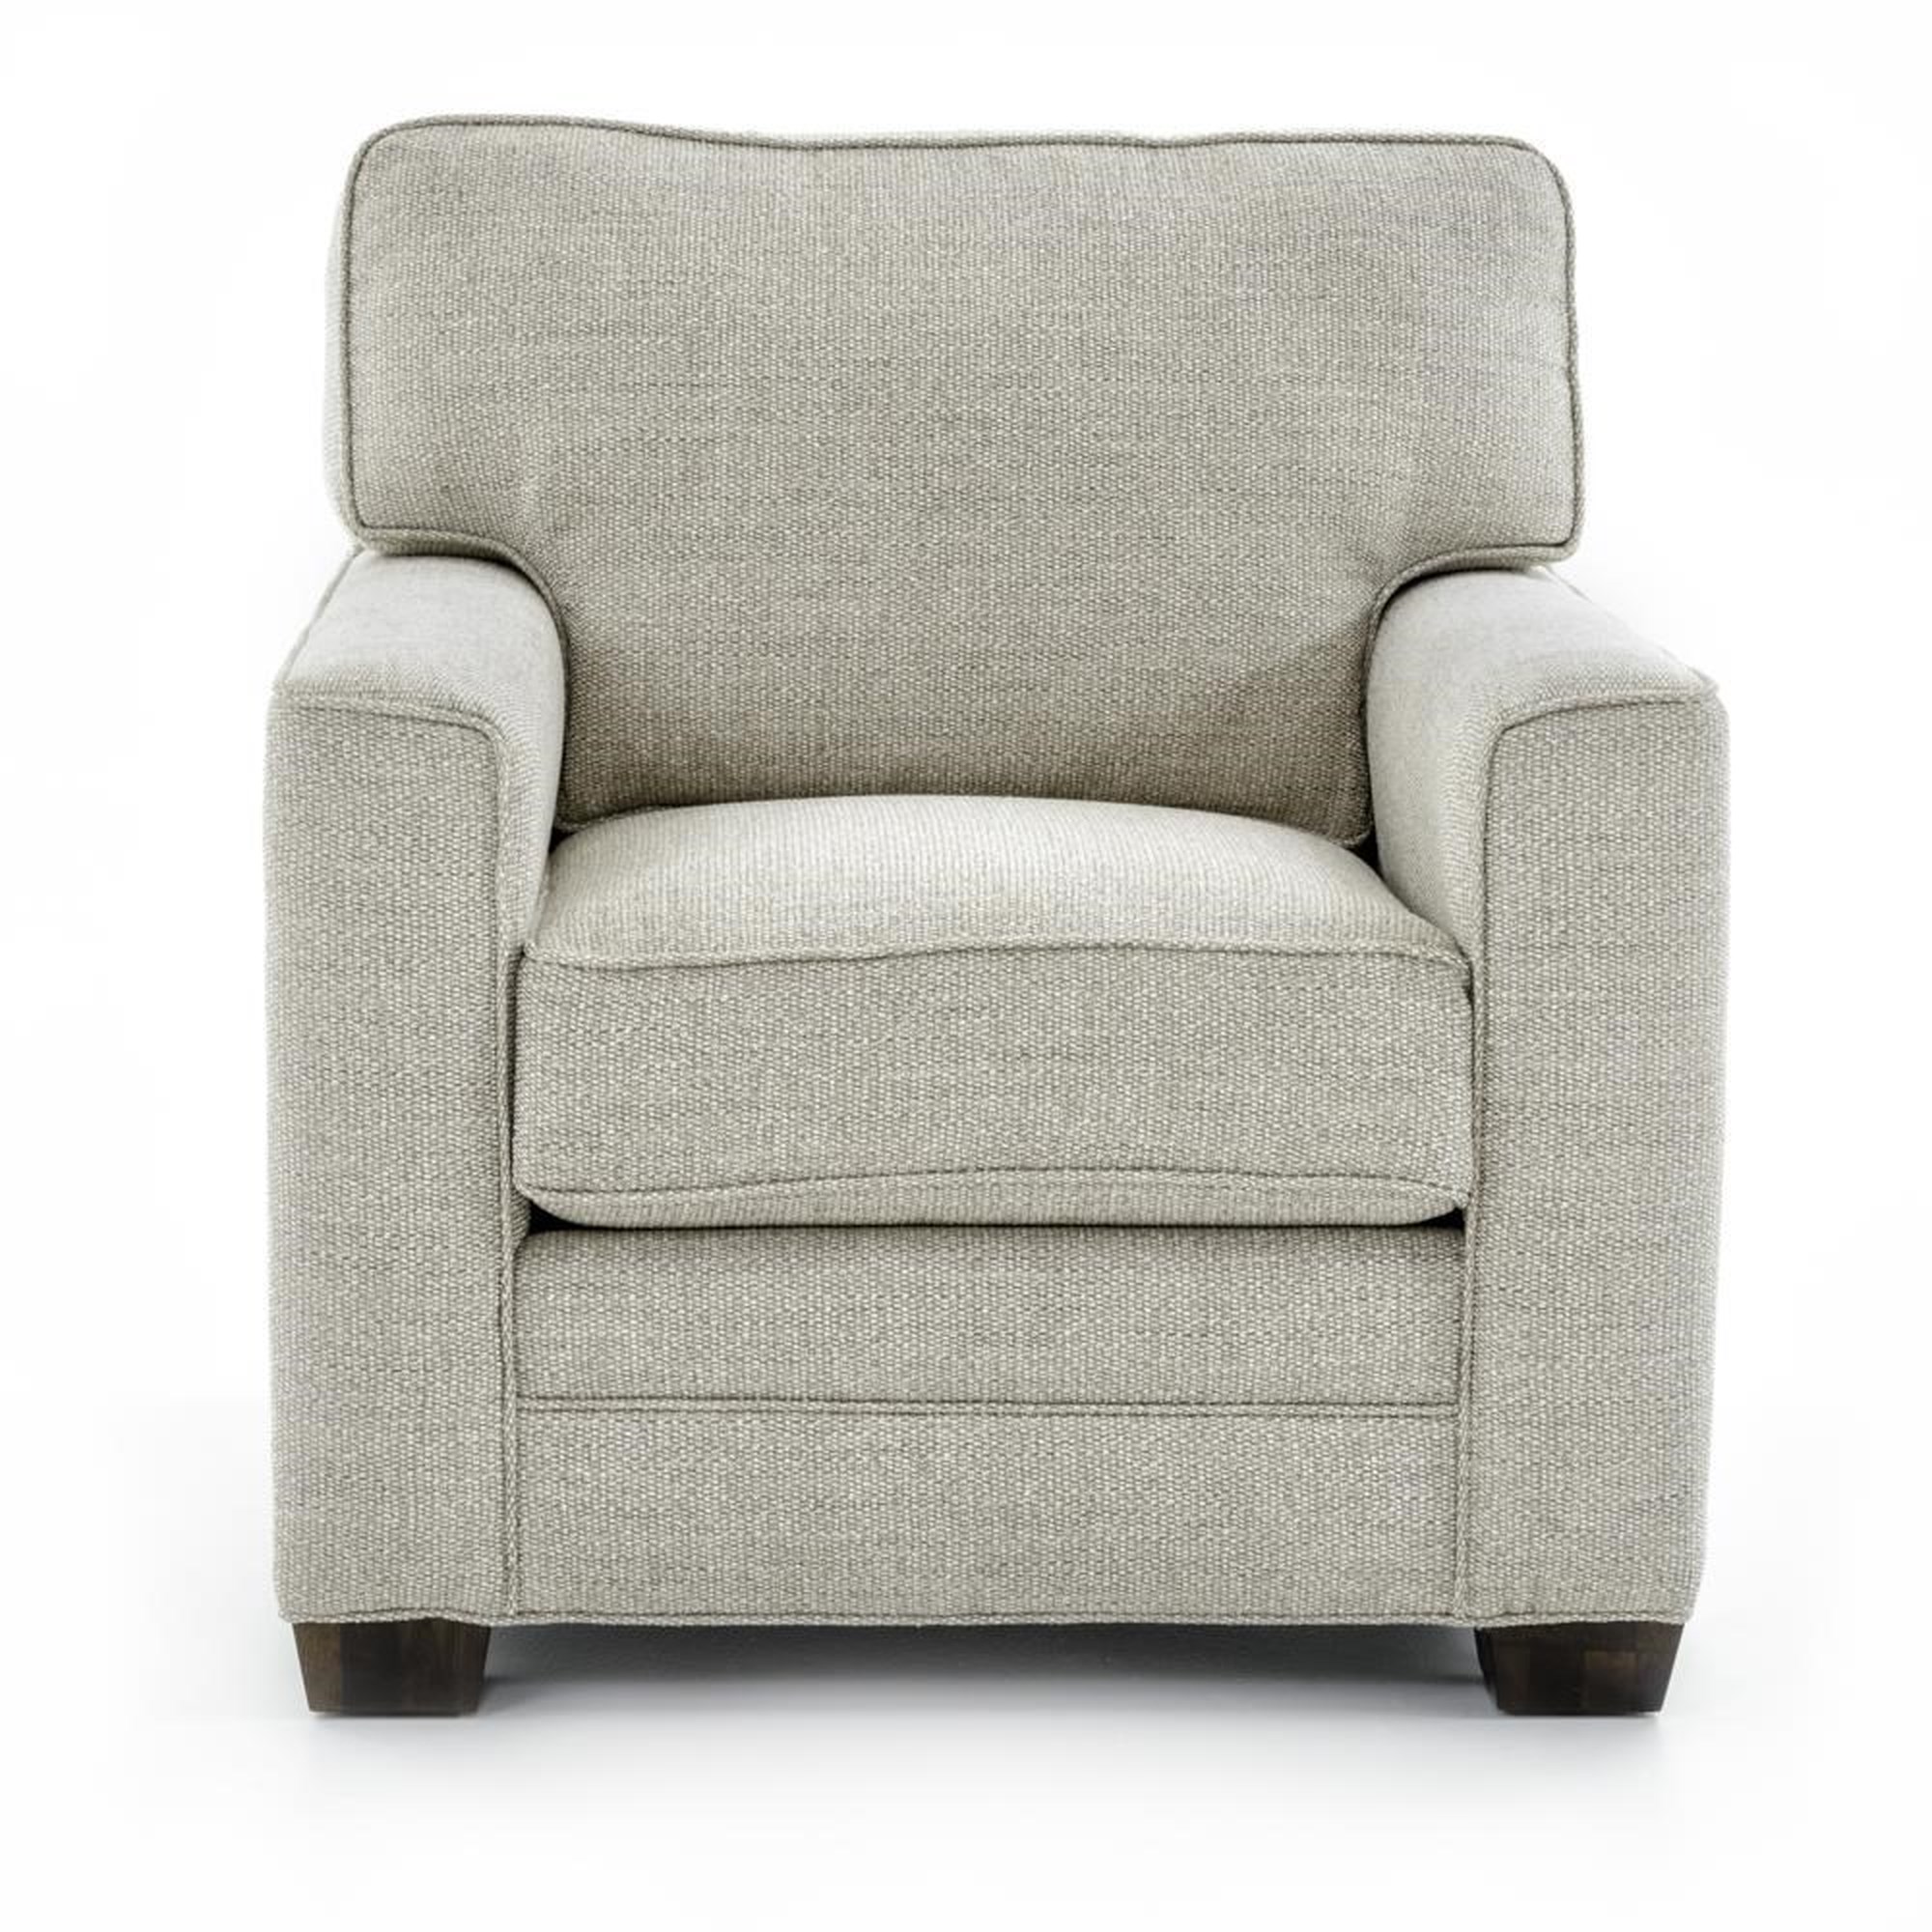 Solutions 2053 Customizable Upholstered Chair